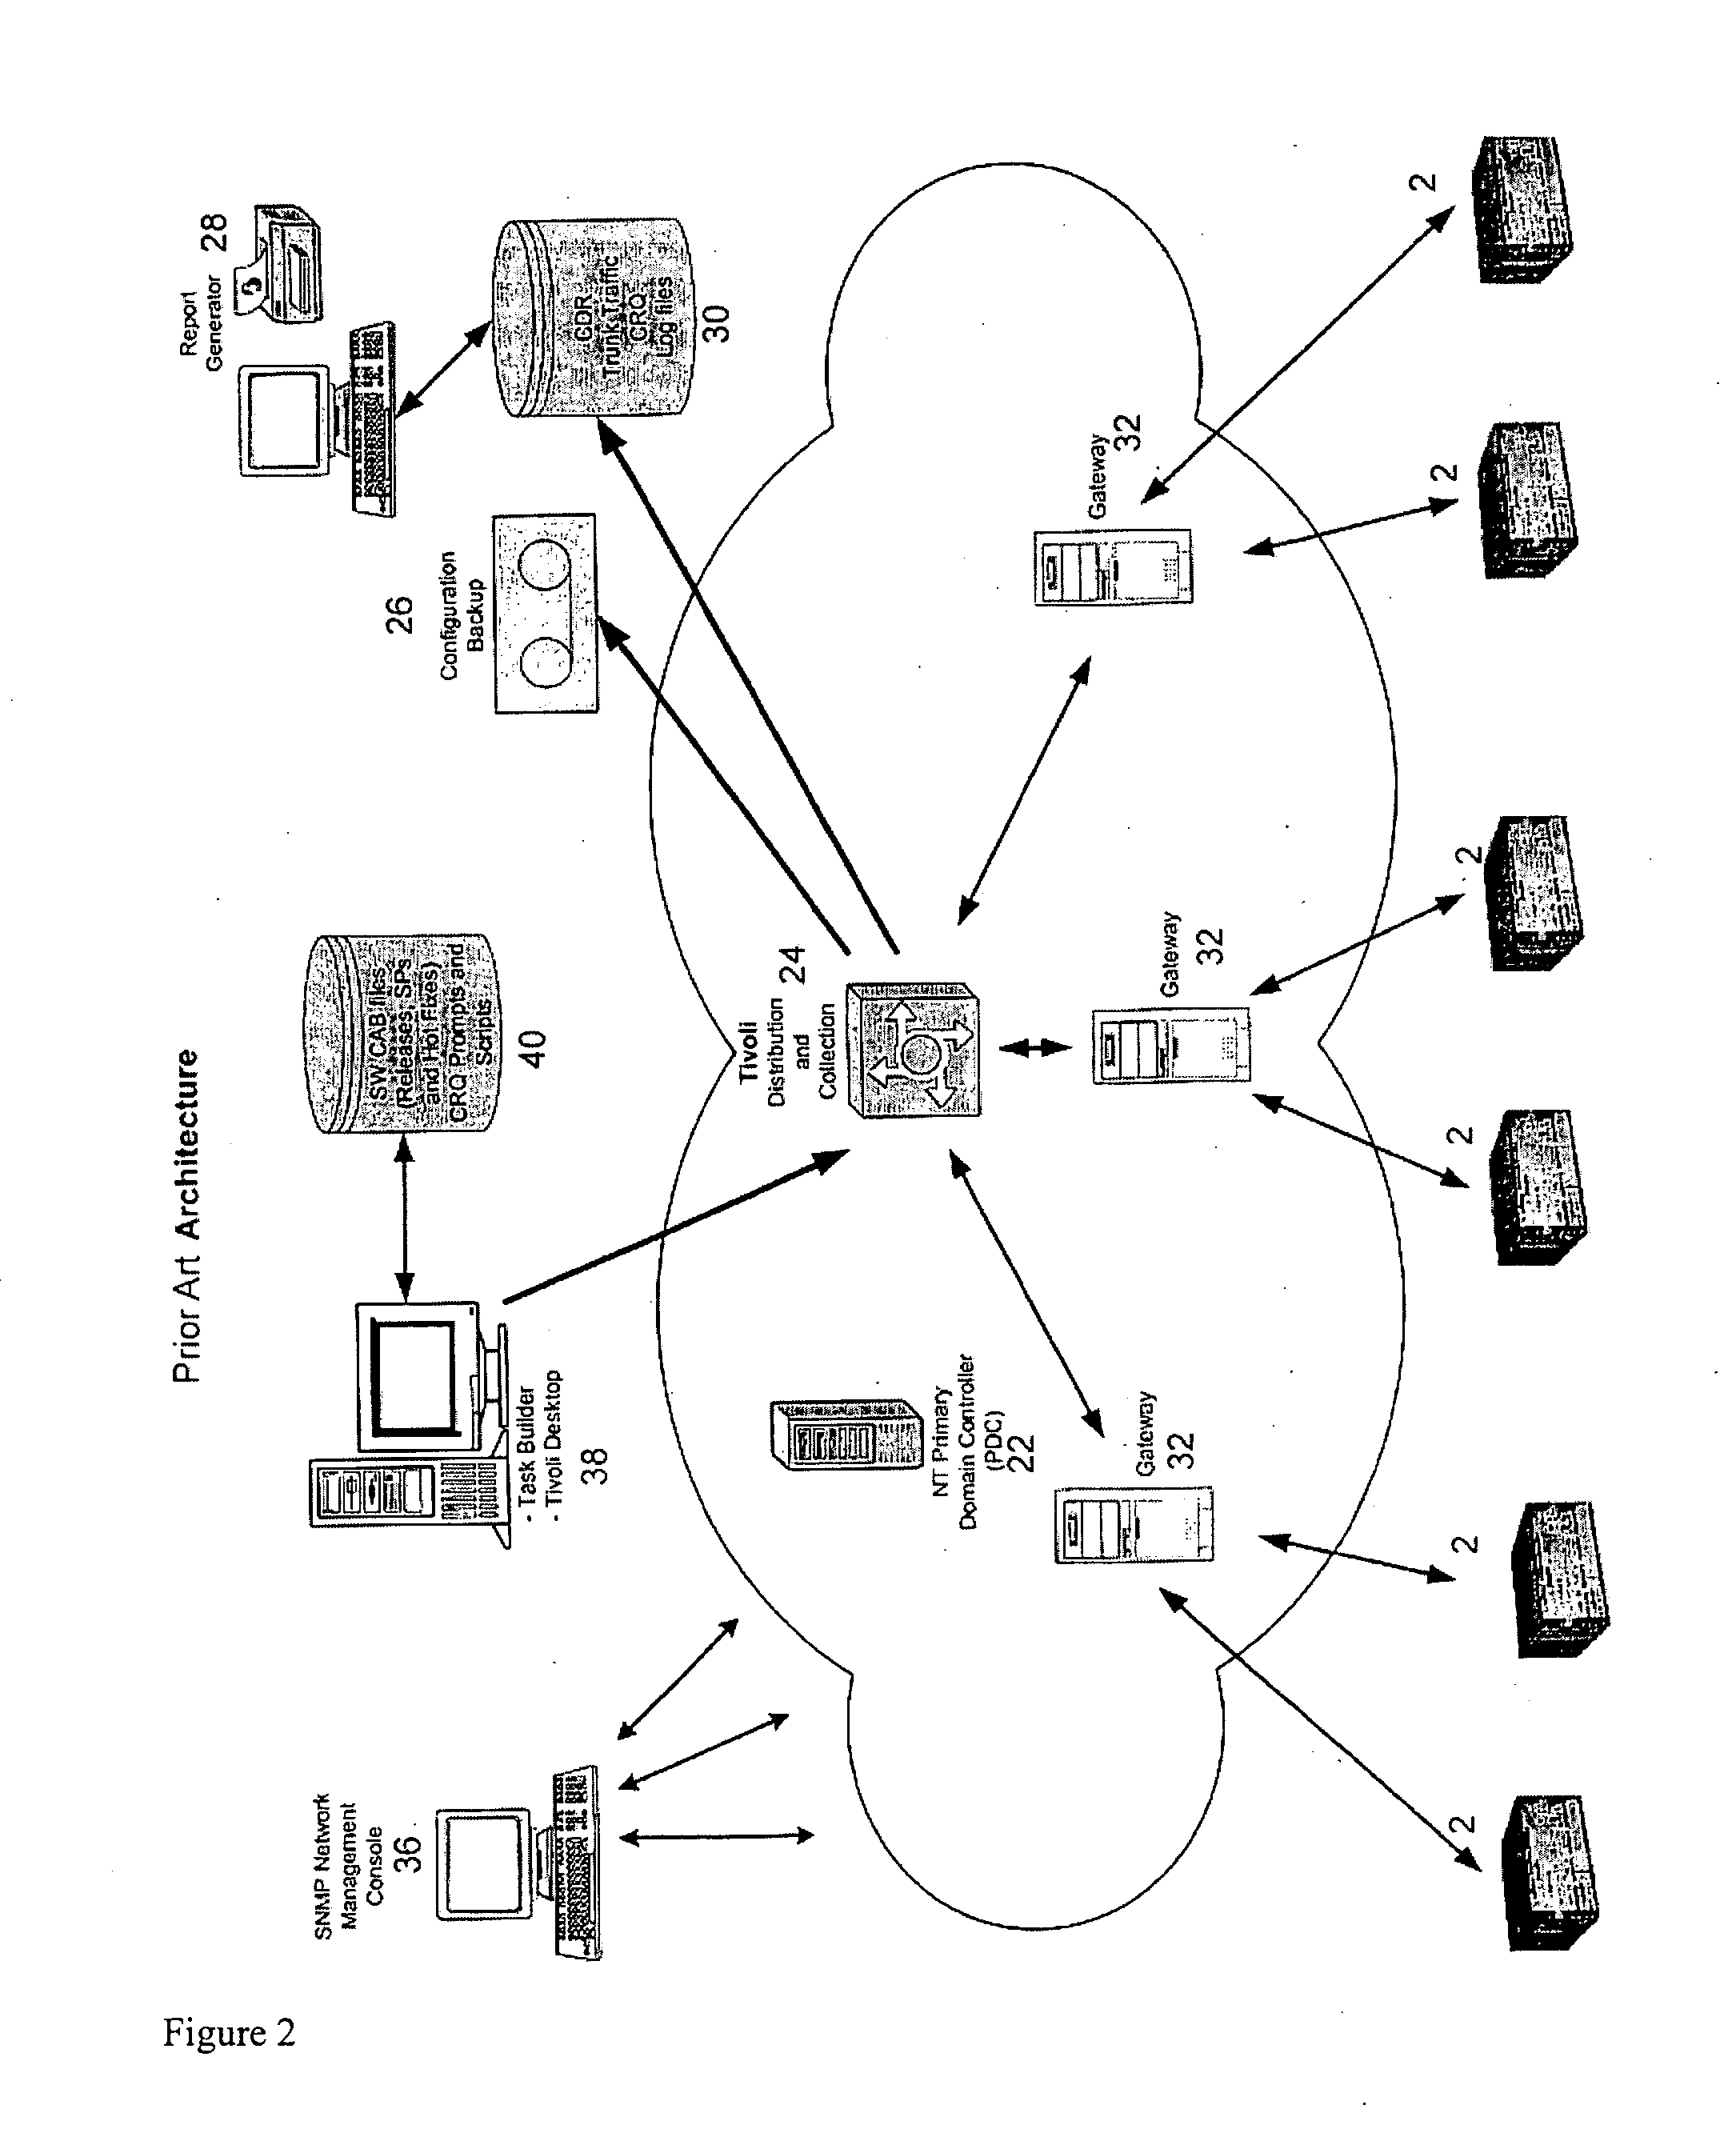 Systems and methods for improved multisite management and reporting of converged communication systems and computer systems